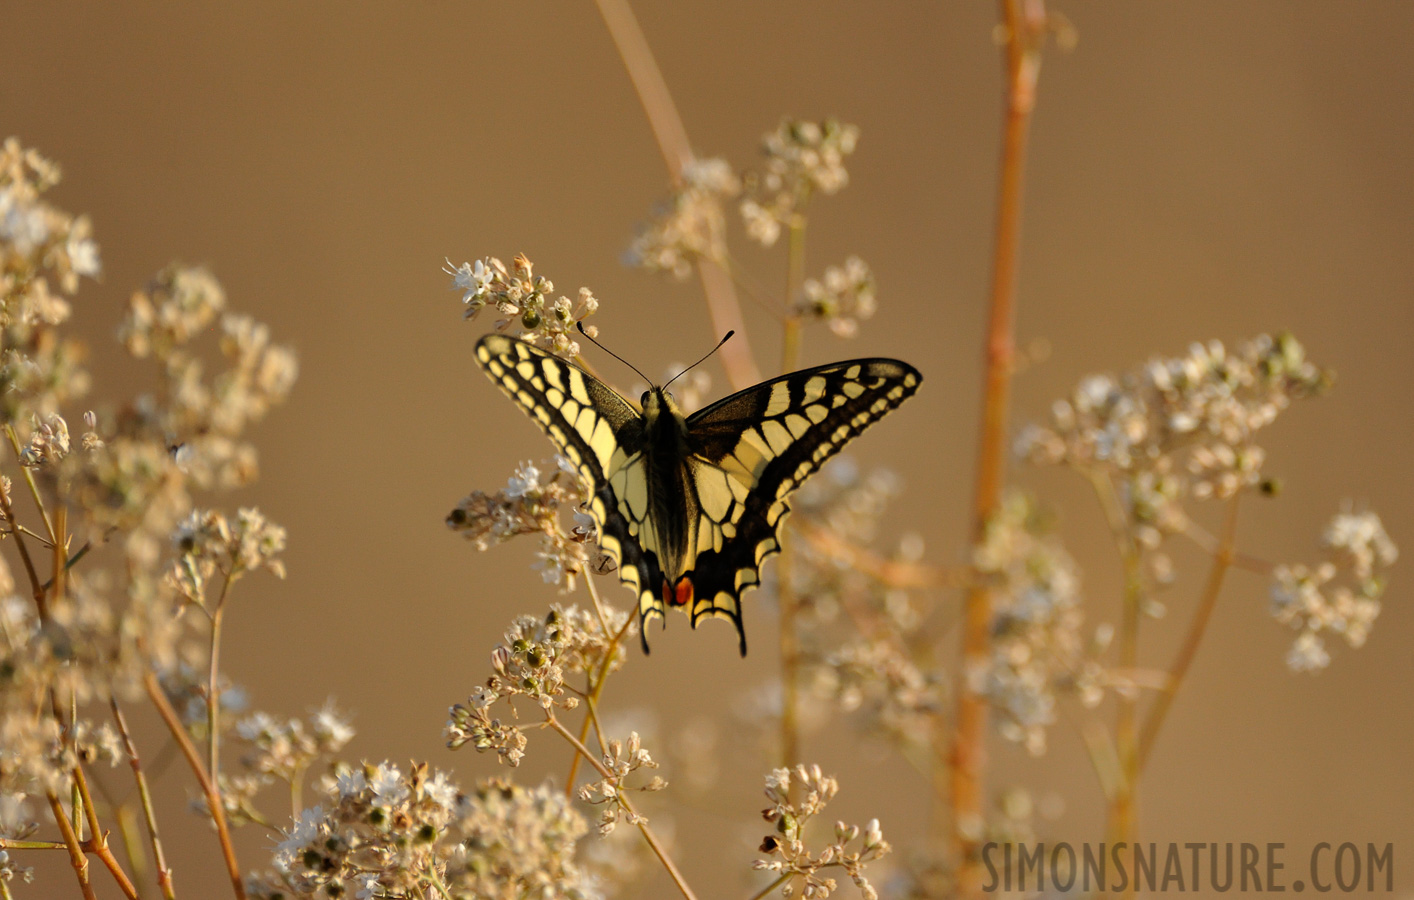 Papilio machaon [550 mm, 1/2500 sec at f / 7.1, ISO 1600]